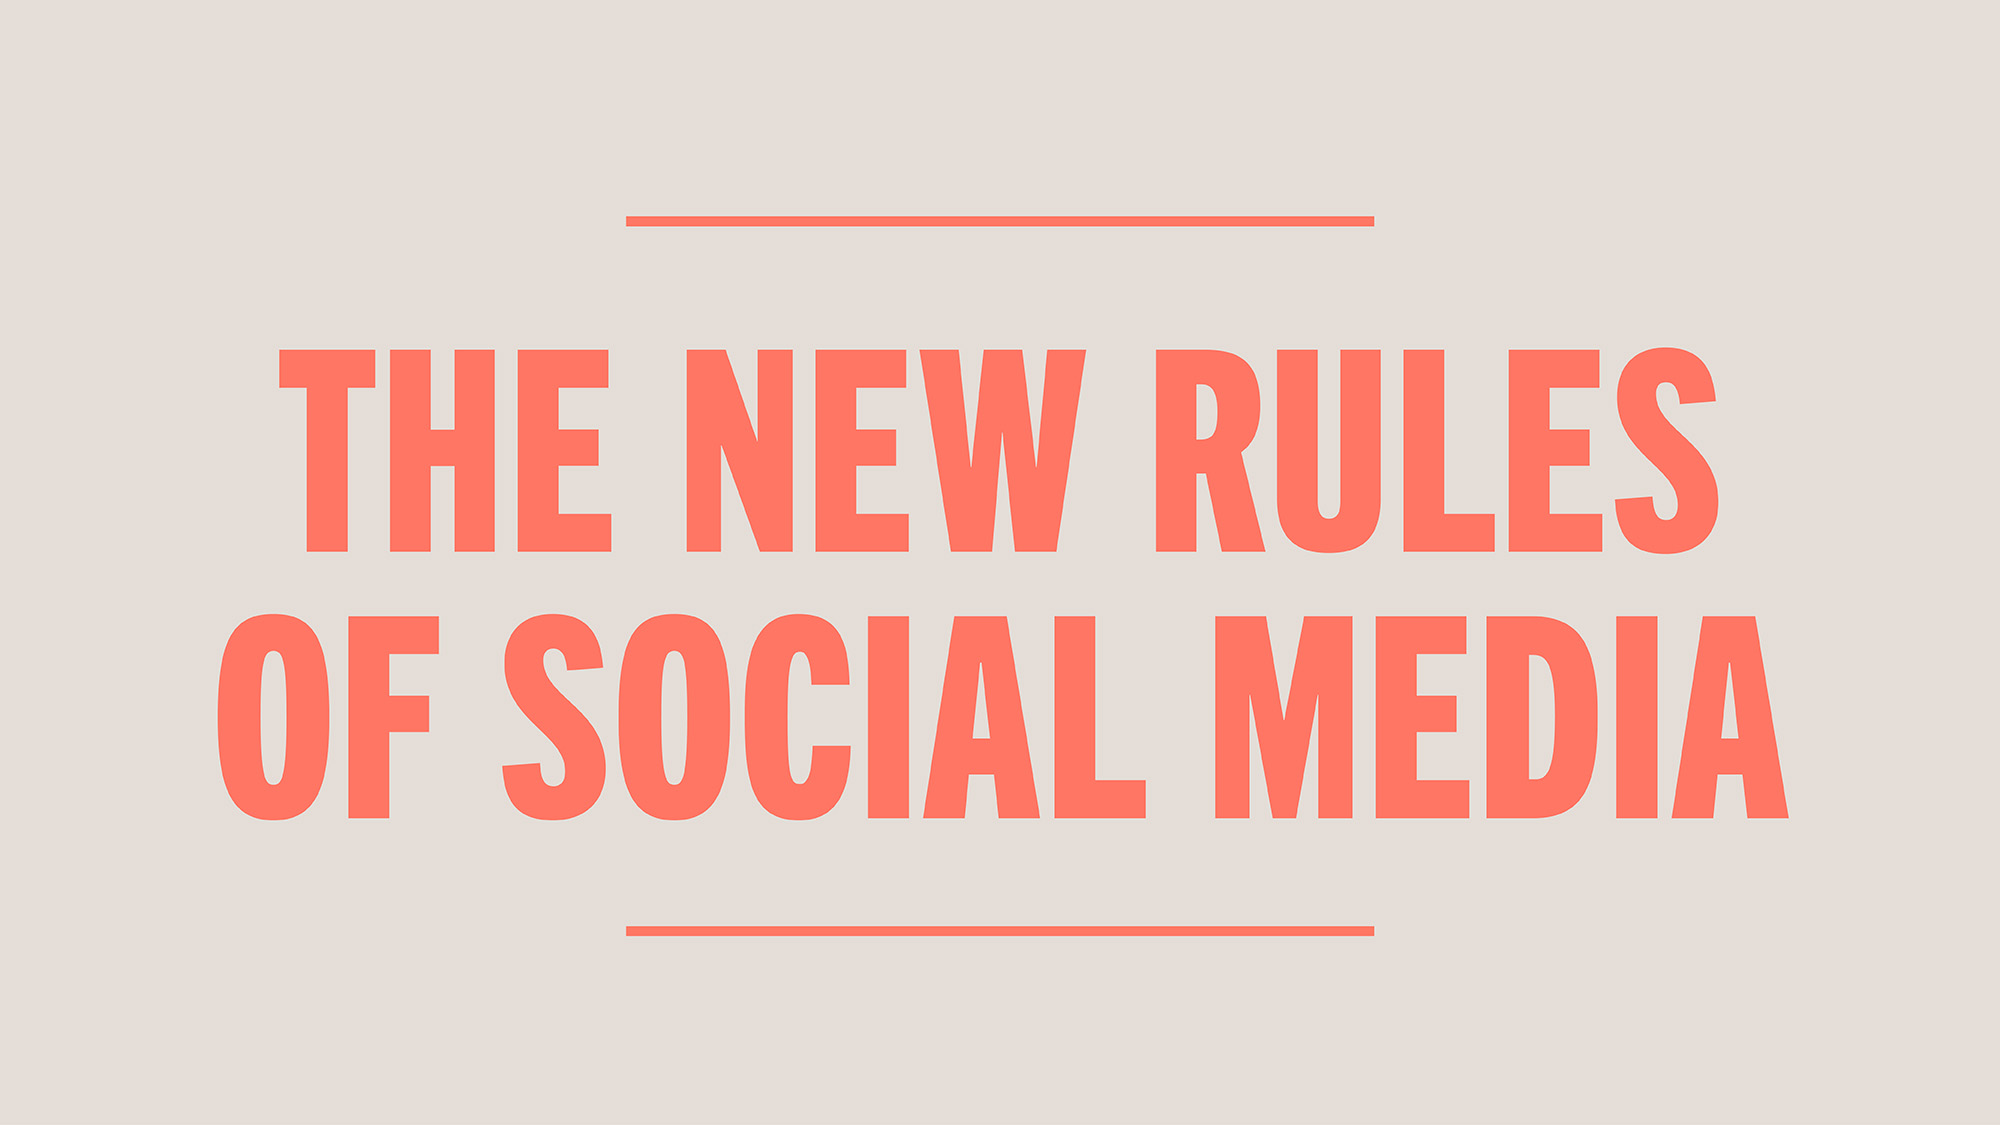 The New Rules of Social Media